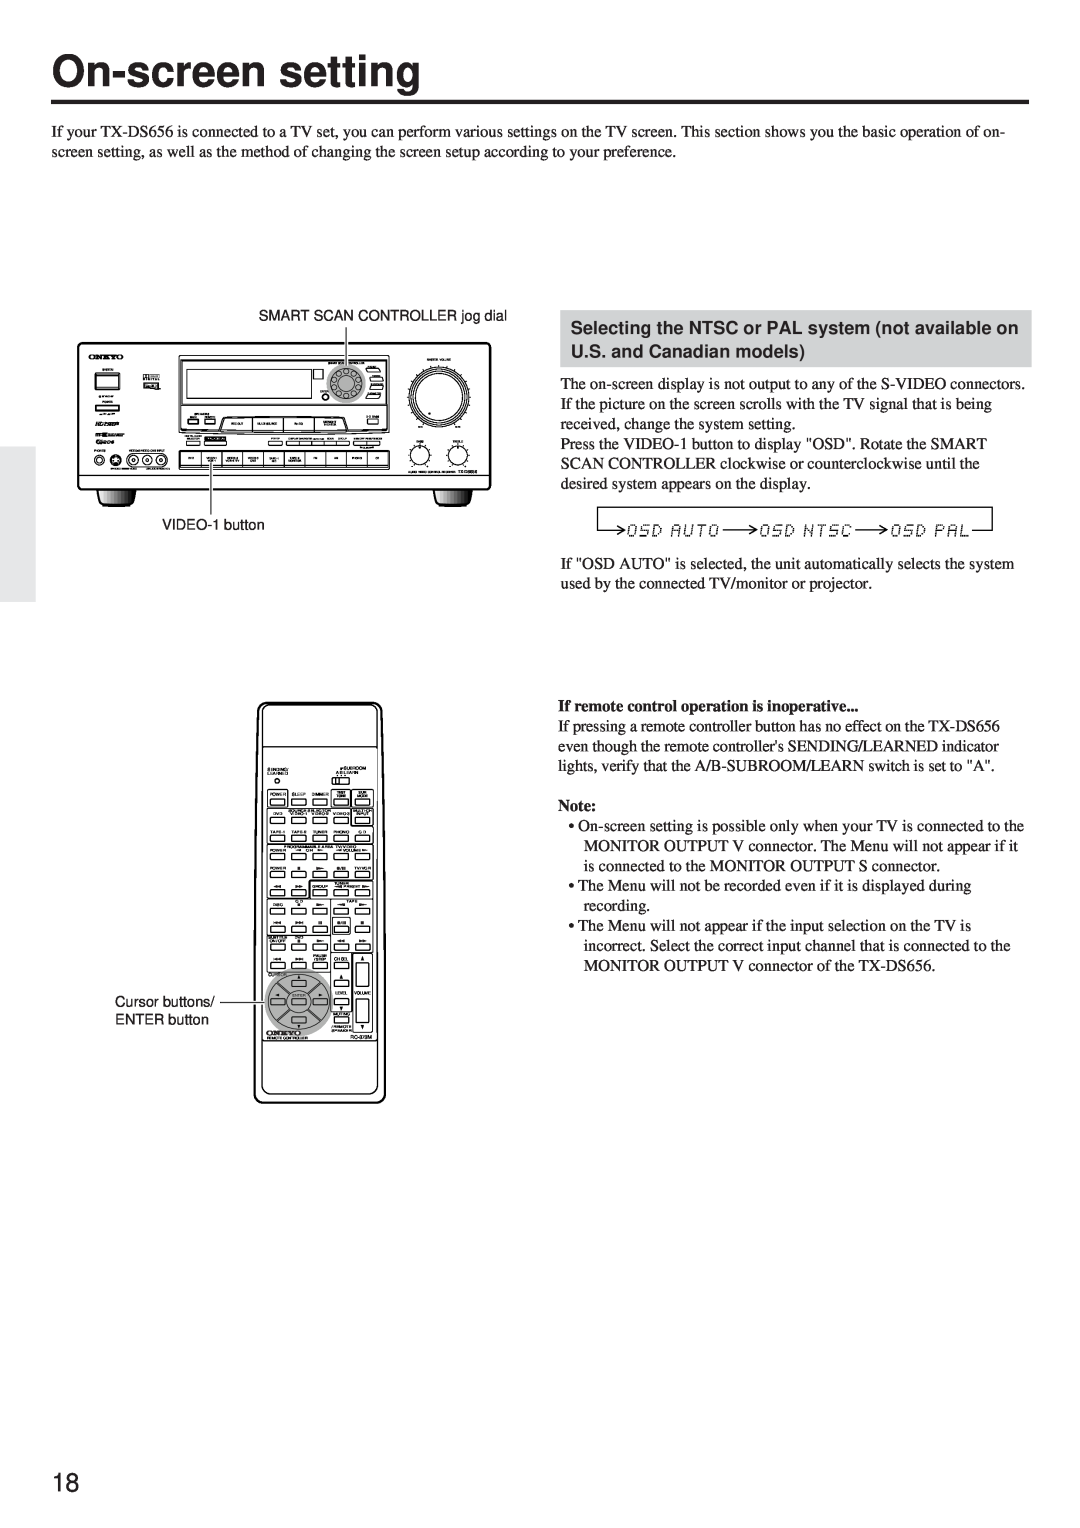 Onkyo TX-DS656 instruction manual On-screensetting, If remote control operation is inoperative 